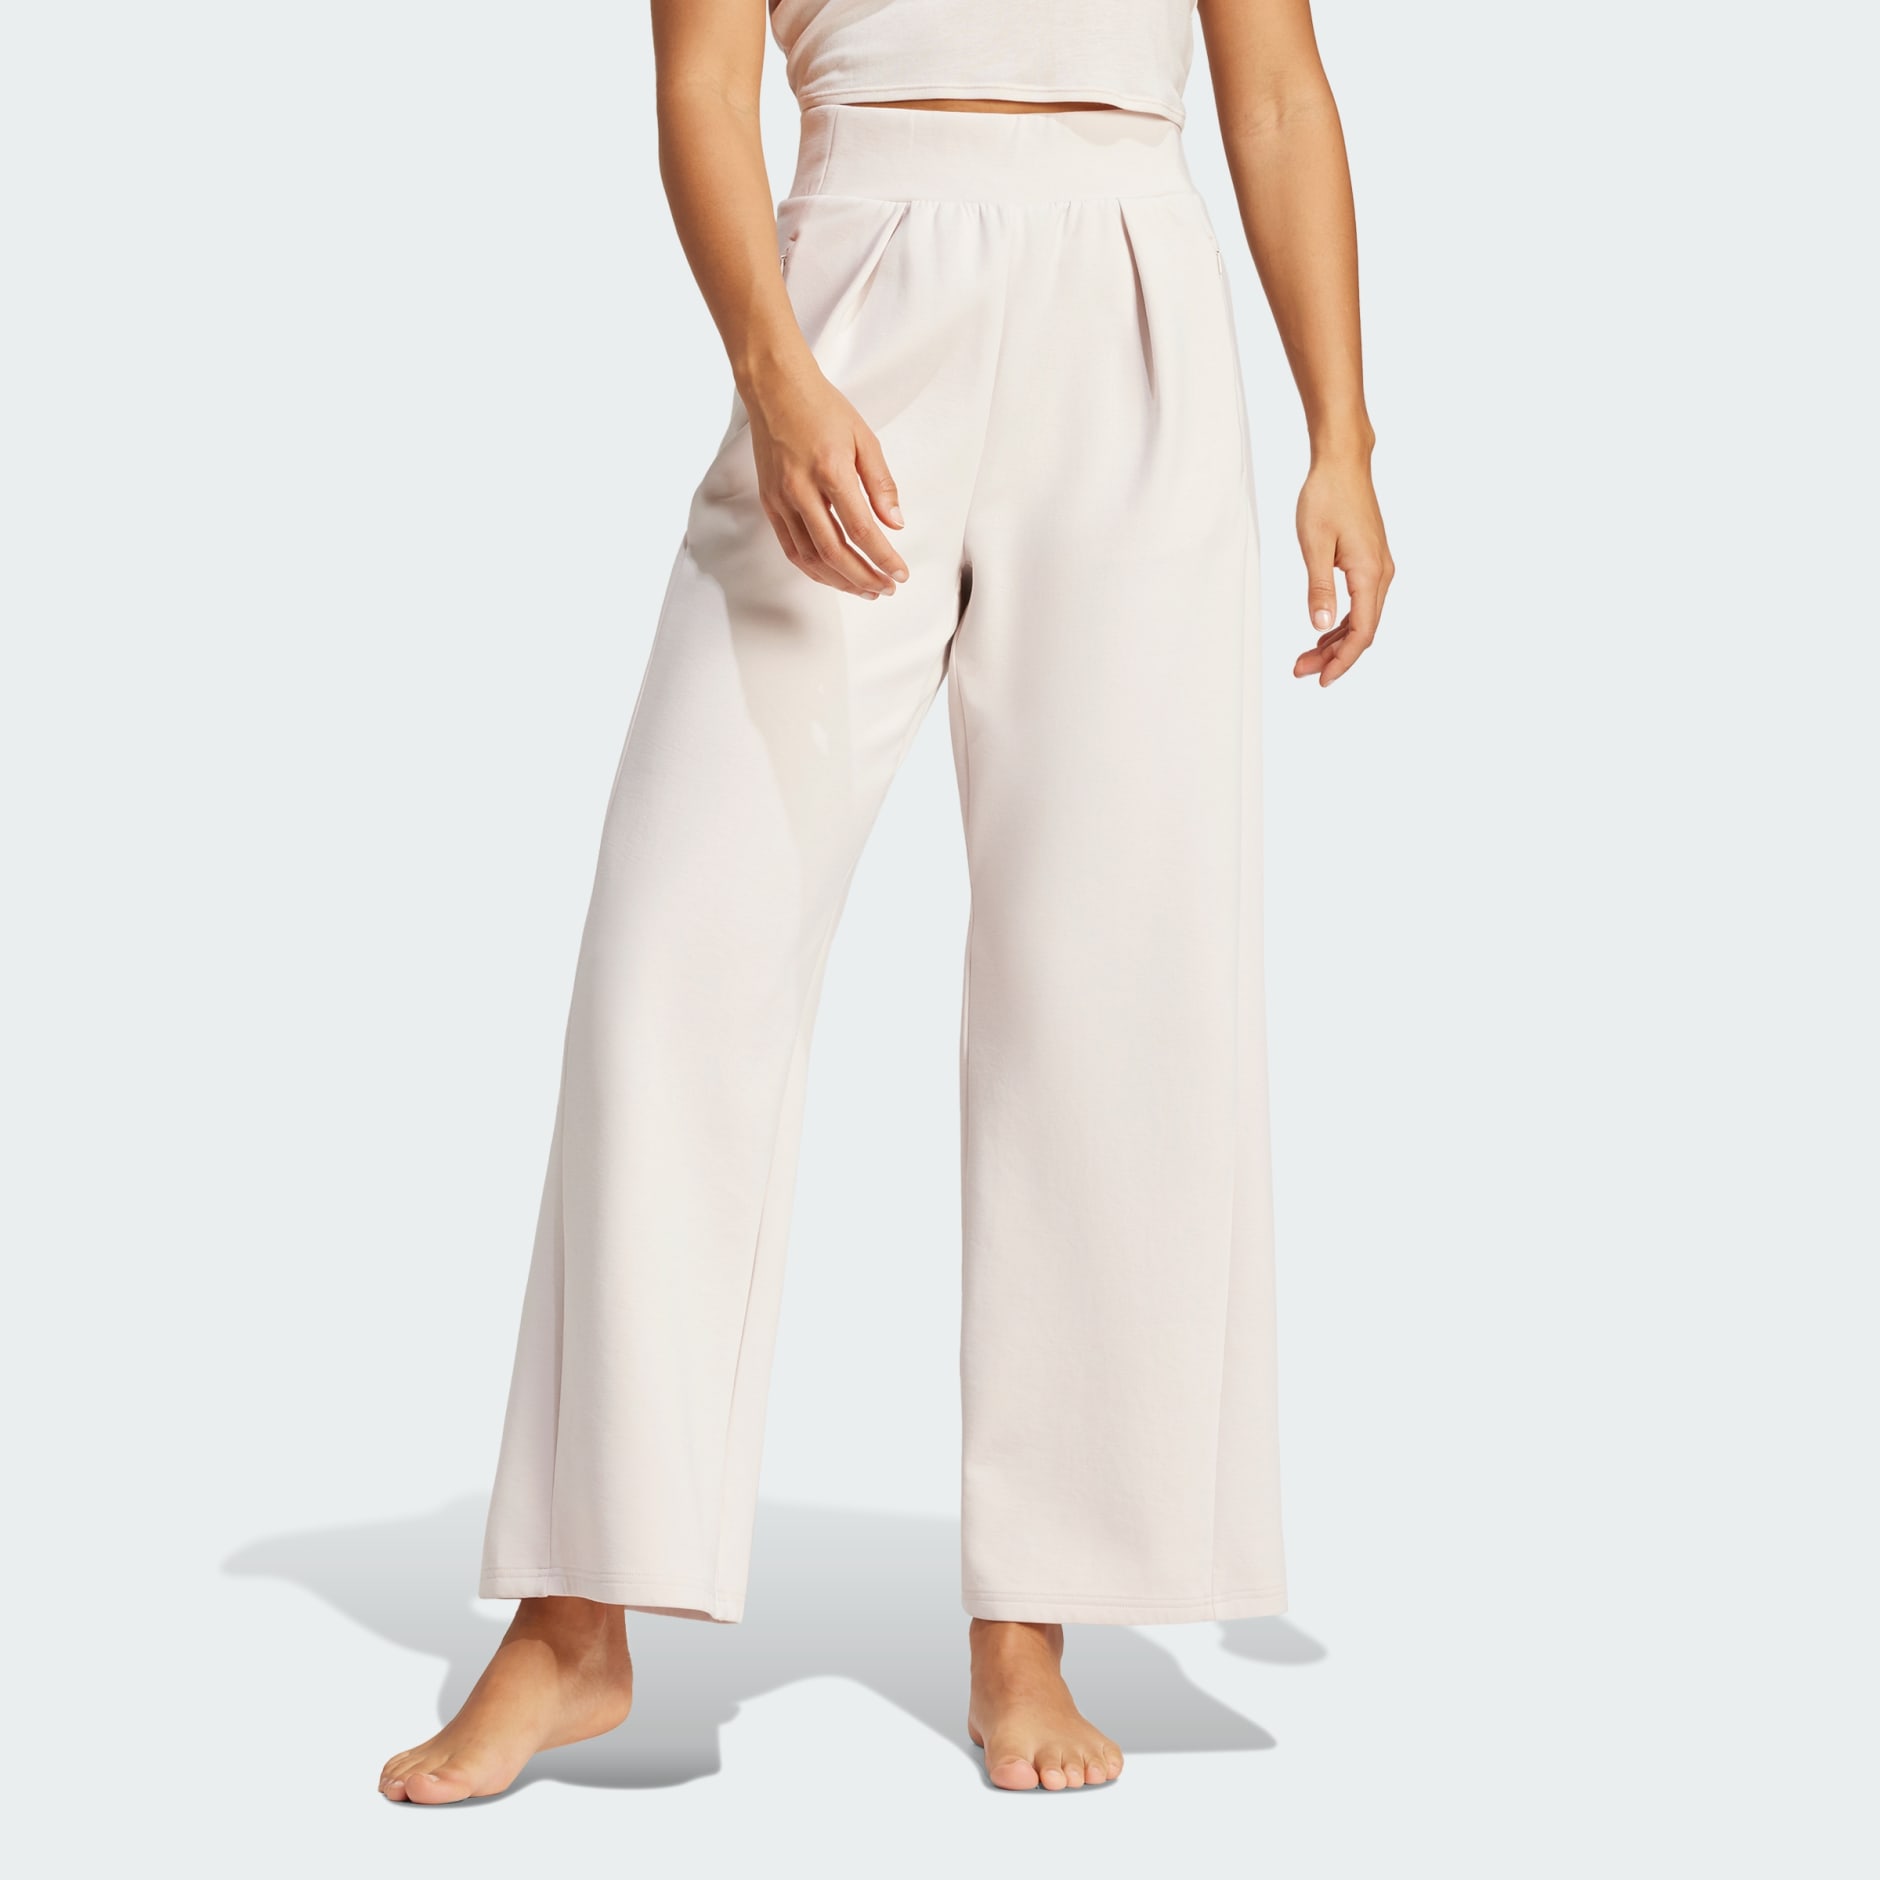 HDE Pull On Capri Pants for Women with Pockets Elastic Waist Cropped Pants,  White, M price in UAE,  UAE